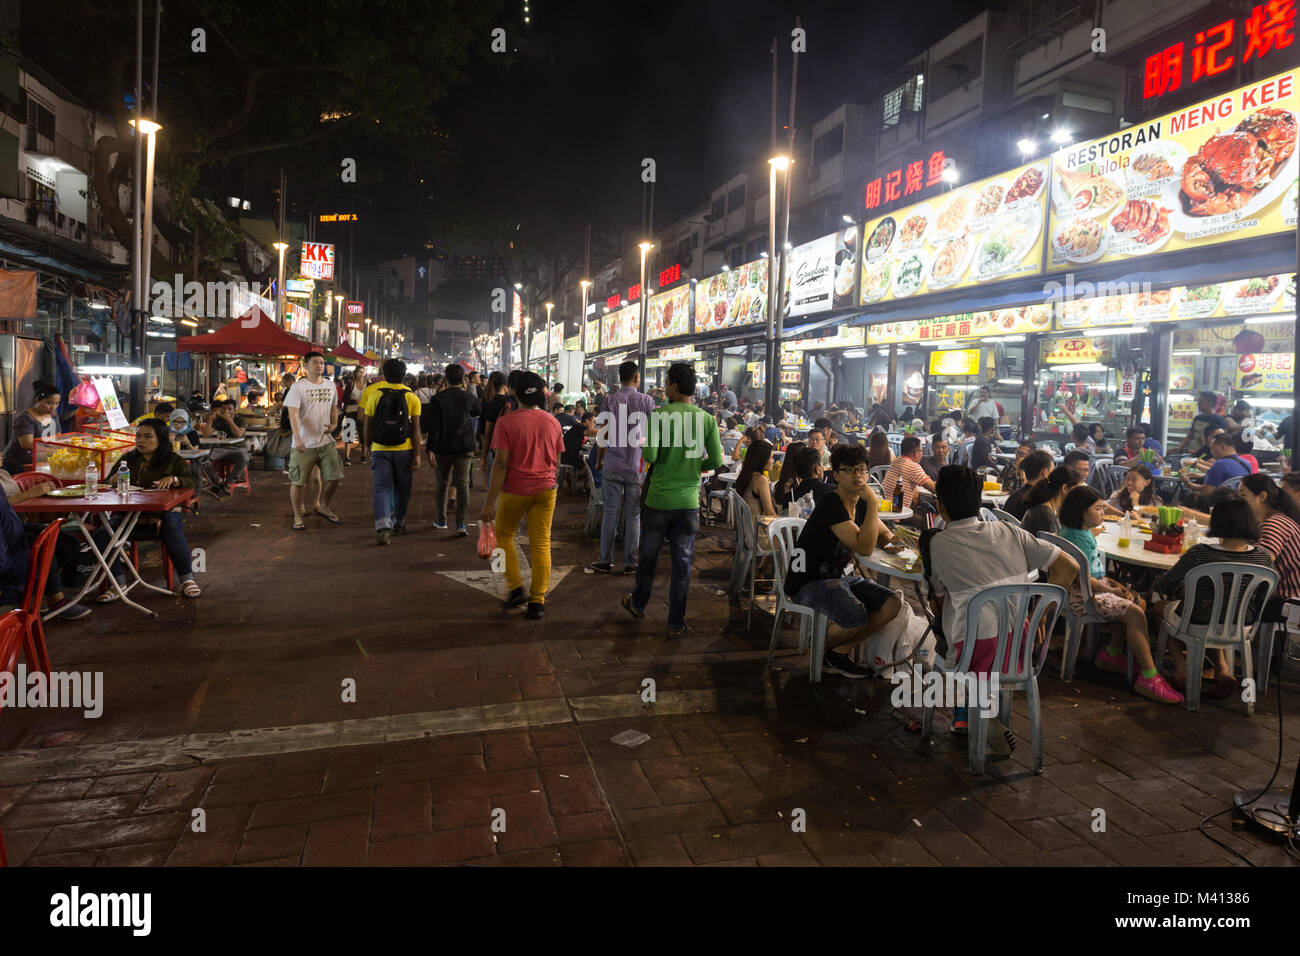 Kuala Lumpur, Malaysia - December 22 2017: Tourists and locals eating in Jalan Alor famous for its chinese food restaurant and street food stalls near Stock Photo